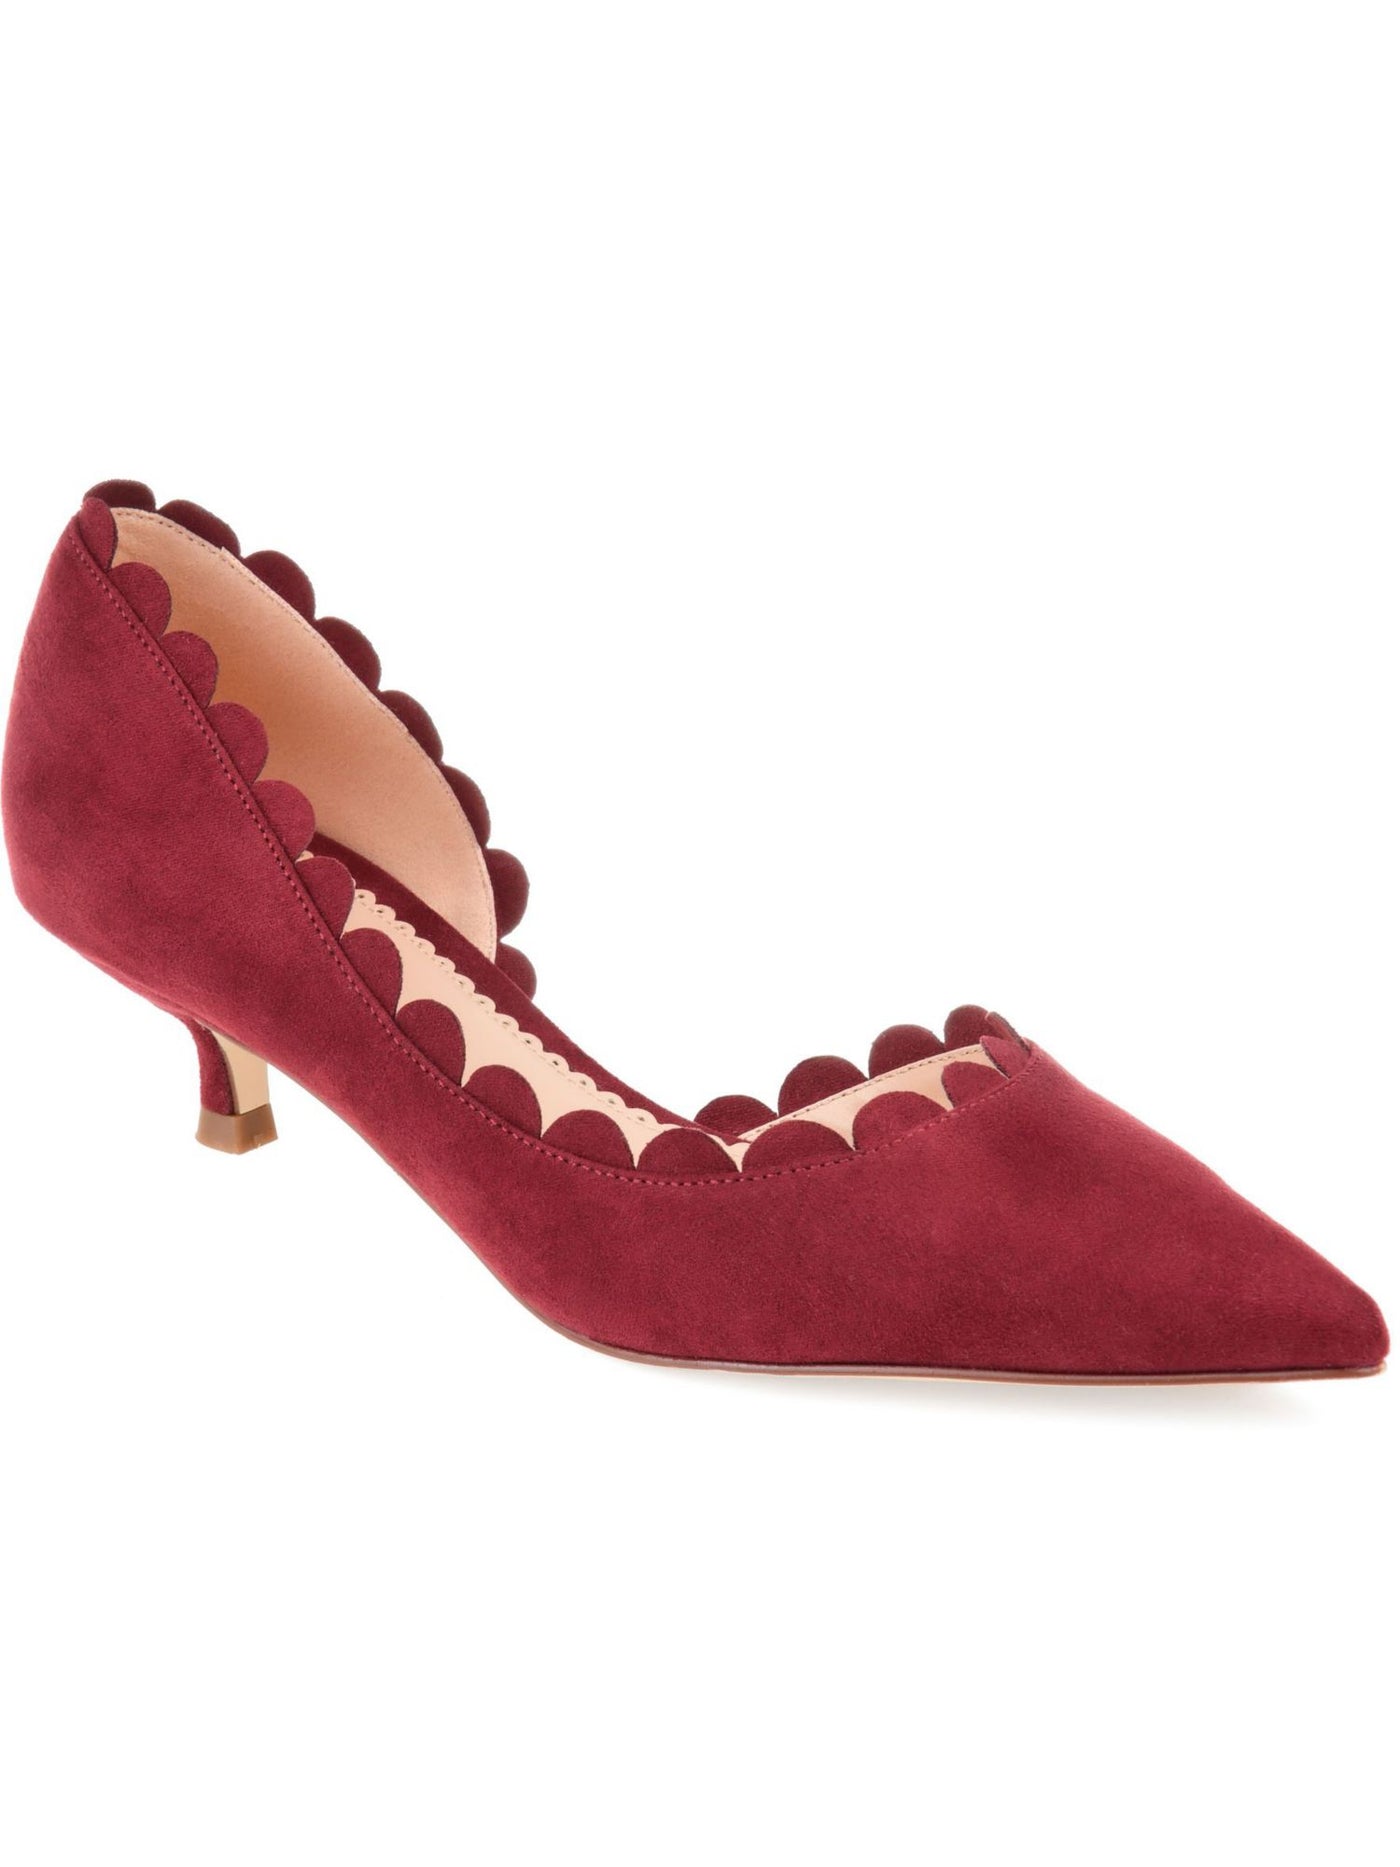 JOURNEE COLLECTION Womens Burgundy D'orsay Scalloped Edge Detail Taavi Pointed Toe Kitten Heel Slip On Dress Pumps Shoes 8.5